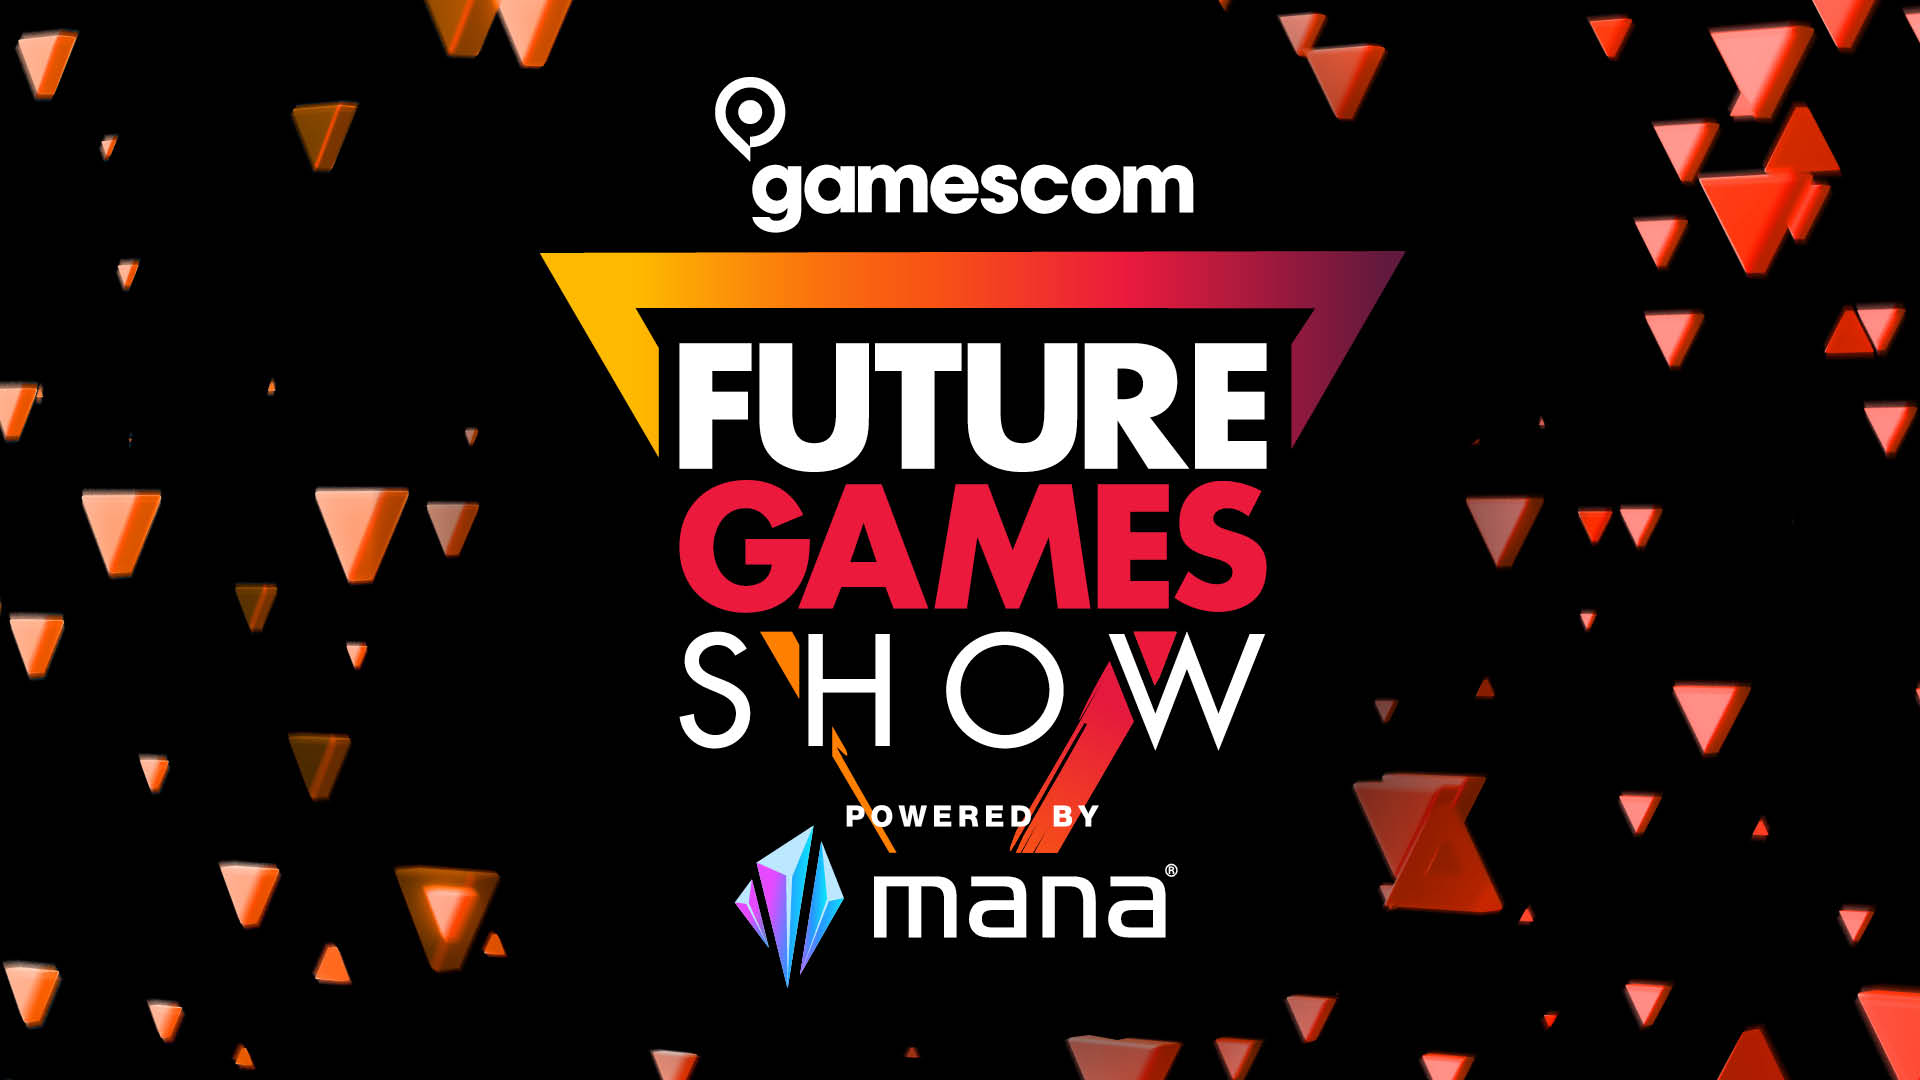  The Future Games Show is coming to Gamescom 2022 